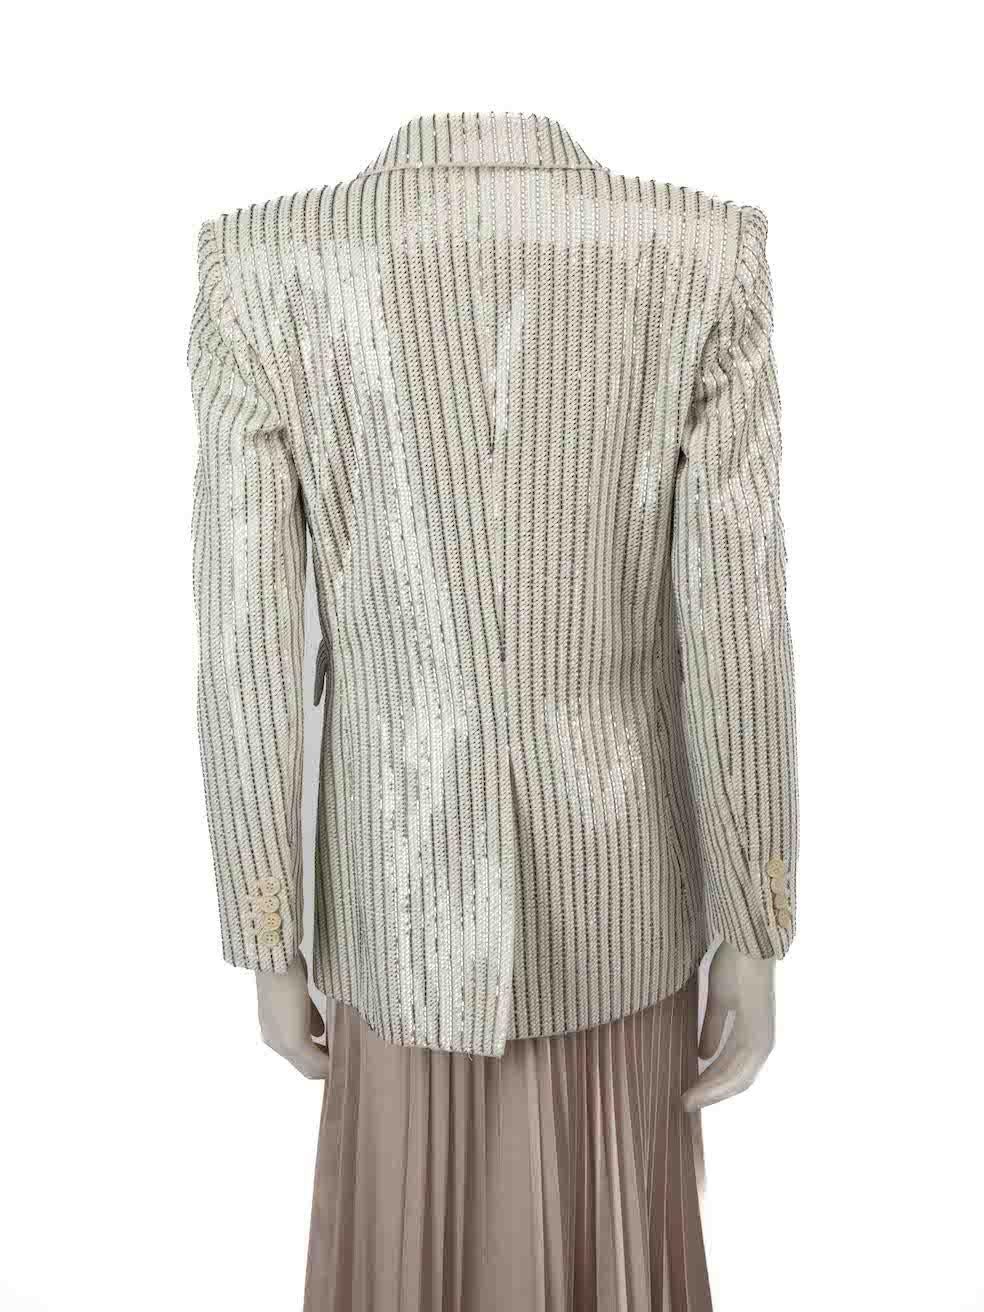 Saint Laurent White Wool Beaded Stripe Blazer Jacket Size S In Good Condition For Sale In London, GB